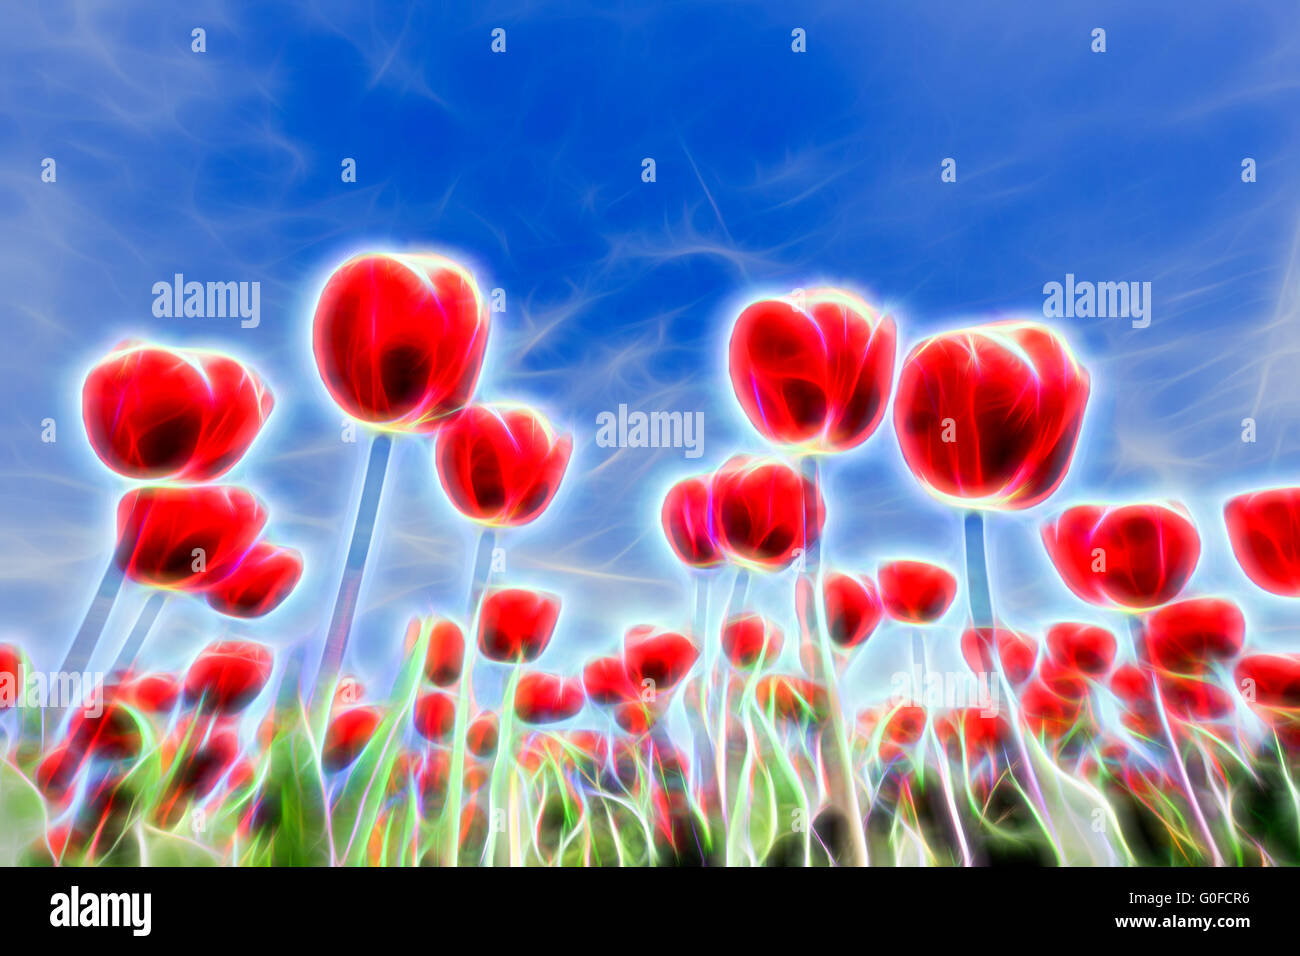 Light effects in group of red tulips with blue sky Stock Photo